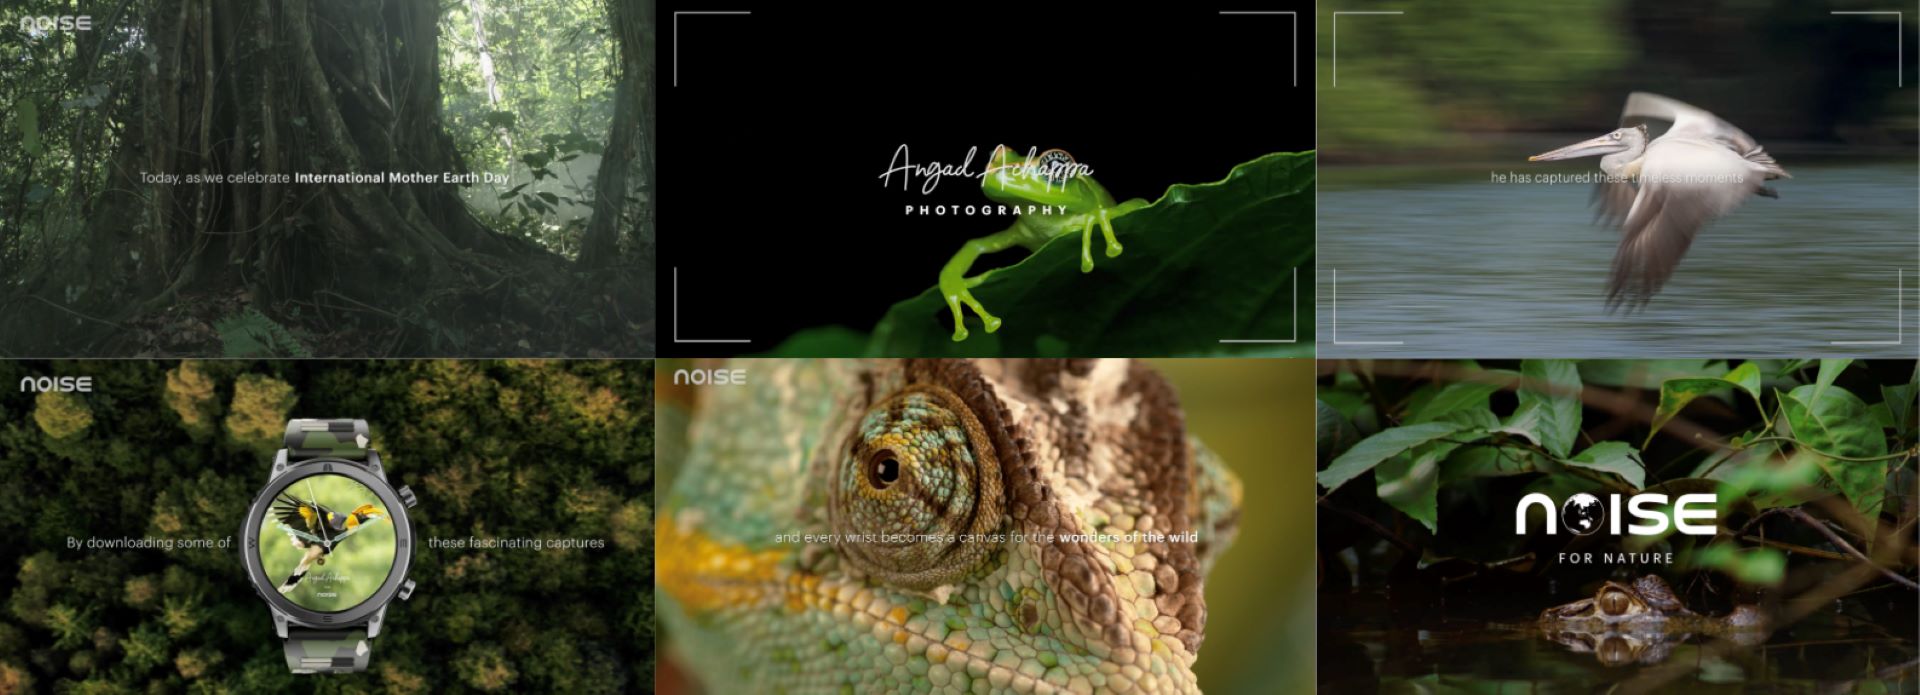 Noise Partners with Angad Achappa for Earth Day Biodiversity Campaign